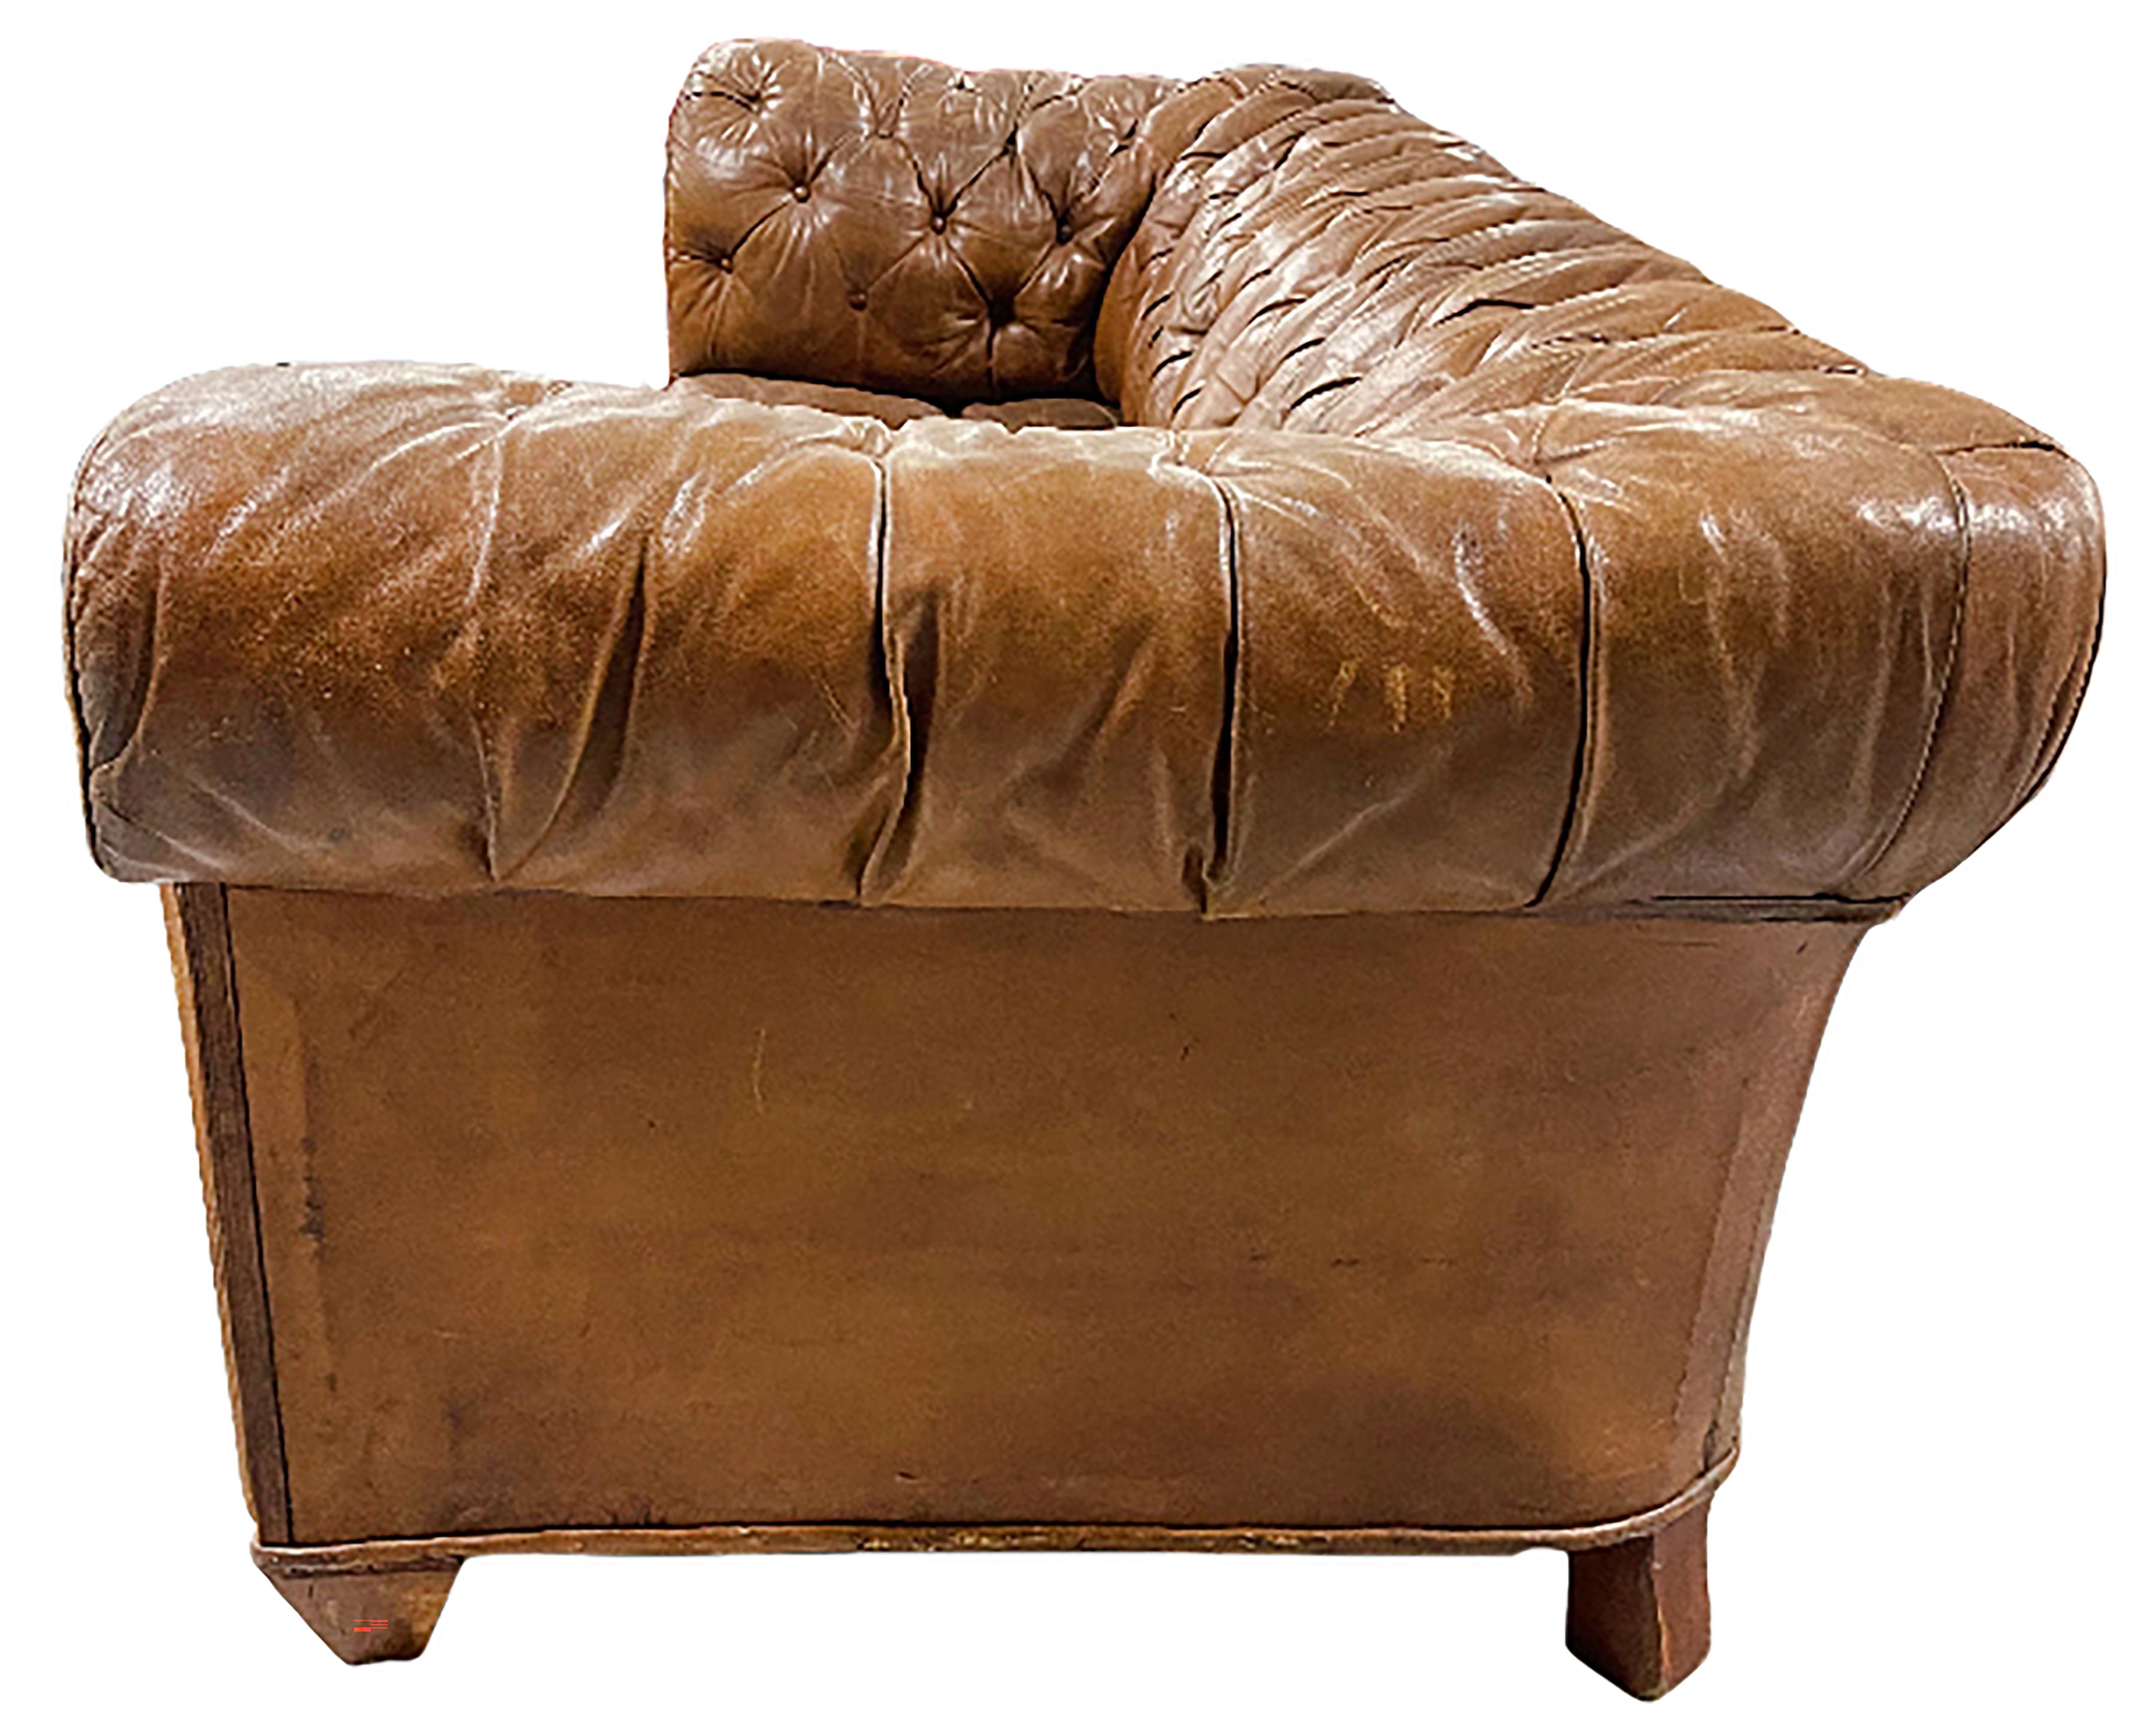 Vintage Tufted Chesterfield Sofa In Good Condition For Sale In Dallas, TX